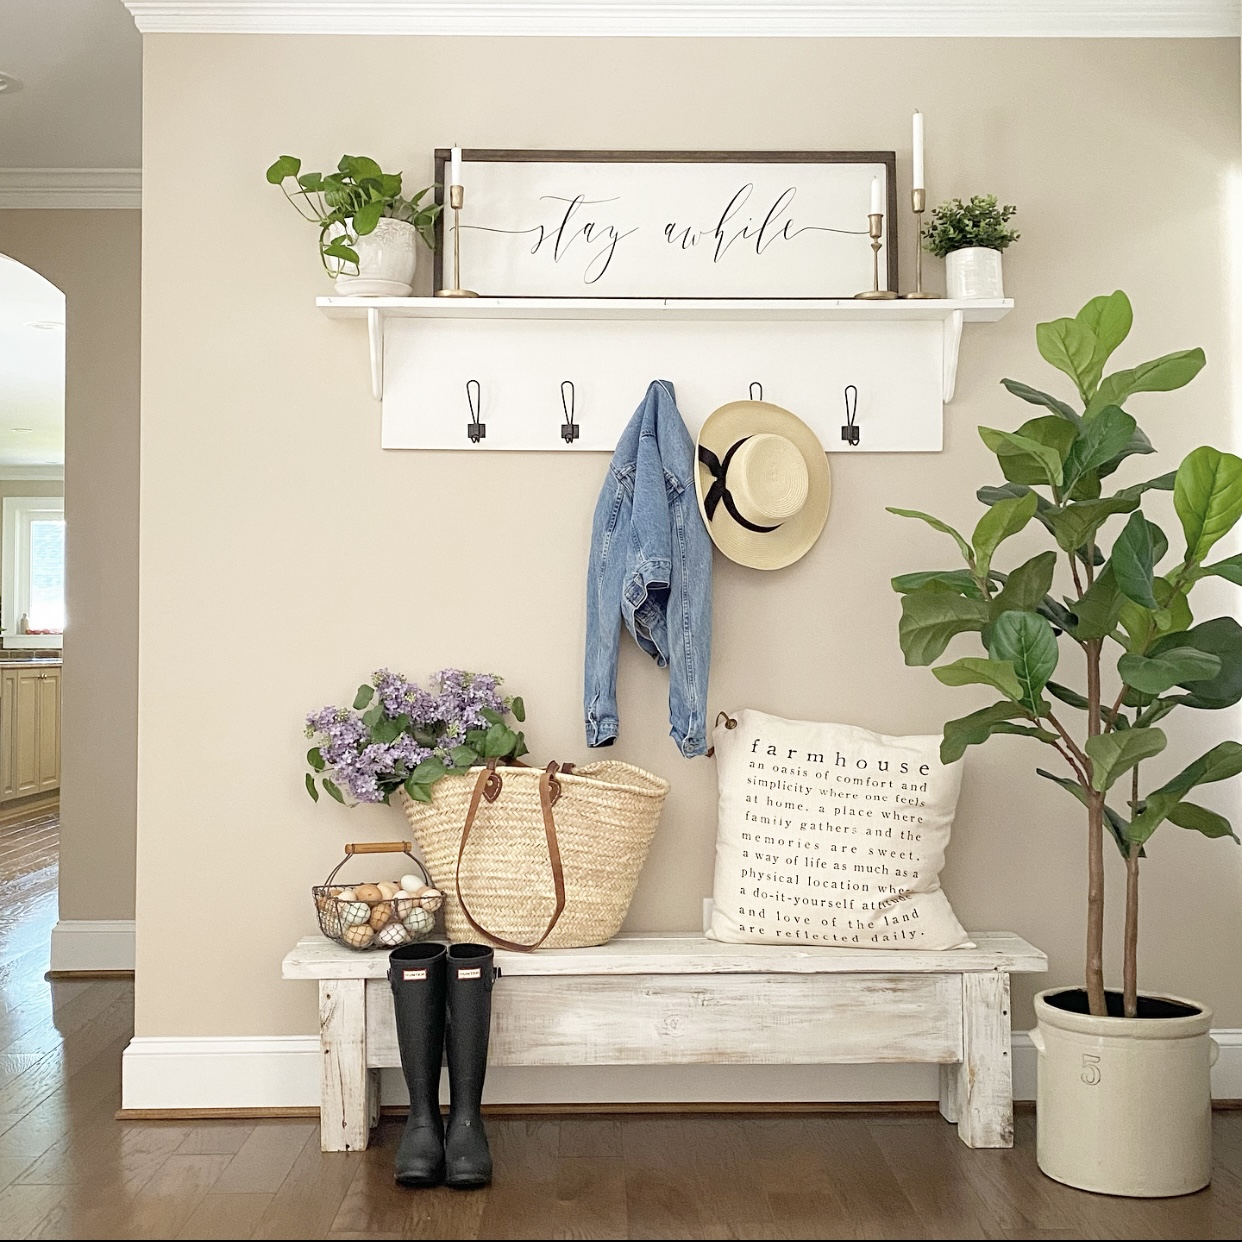 Farmhouse foyer styled with a white wood shelf and hooks. There is a farmhouse sign on self that says, "Stay awhile." A denim jacket and straw hat hang from the hooks.